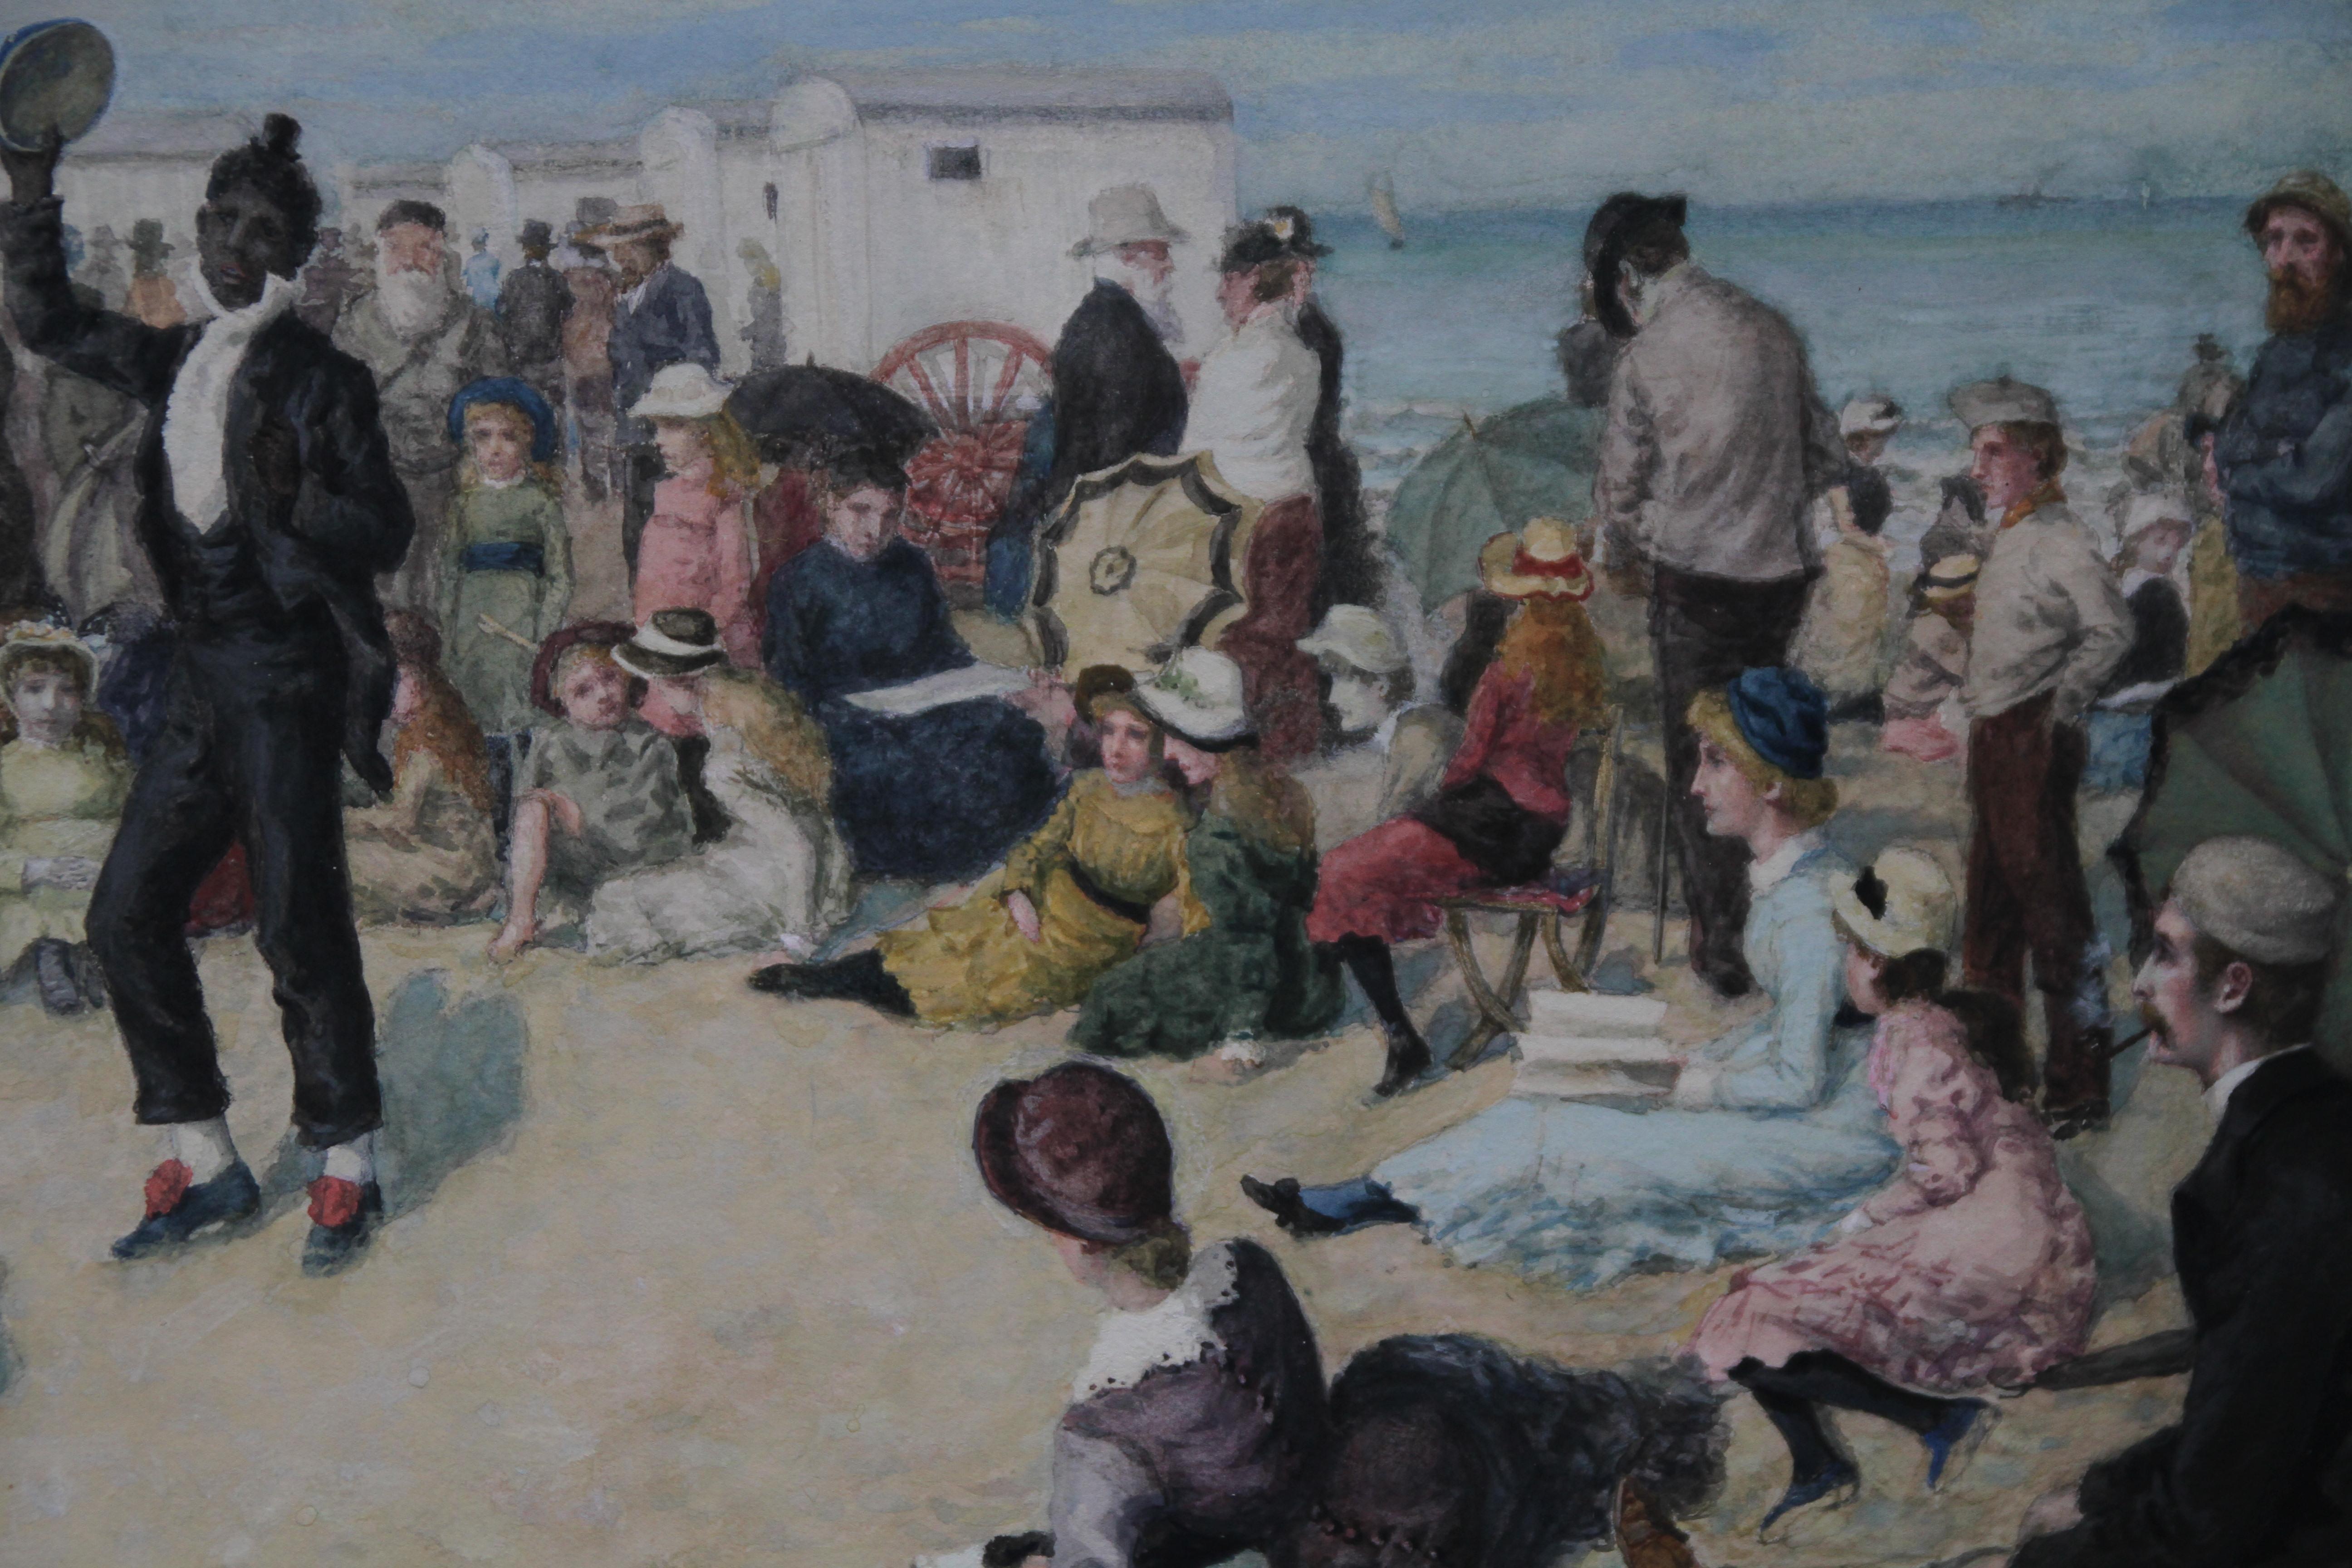 A superb British Victorian watercolour by Owen Dalziel which is titled A Morning Concert and is dated 1883.  A fine large painting, it is a super historical record of a Victorian beach scene with musicians entertaining on a beach. This painting is